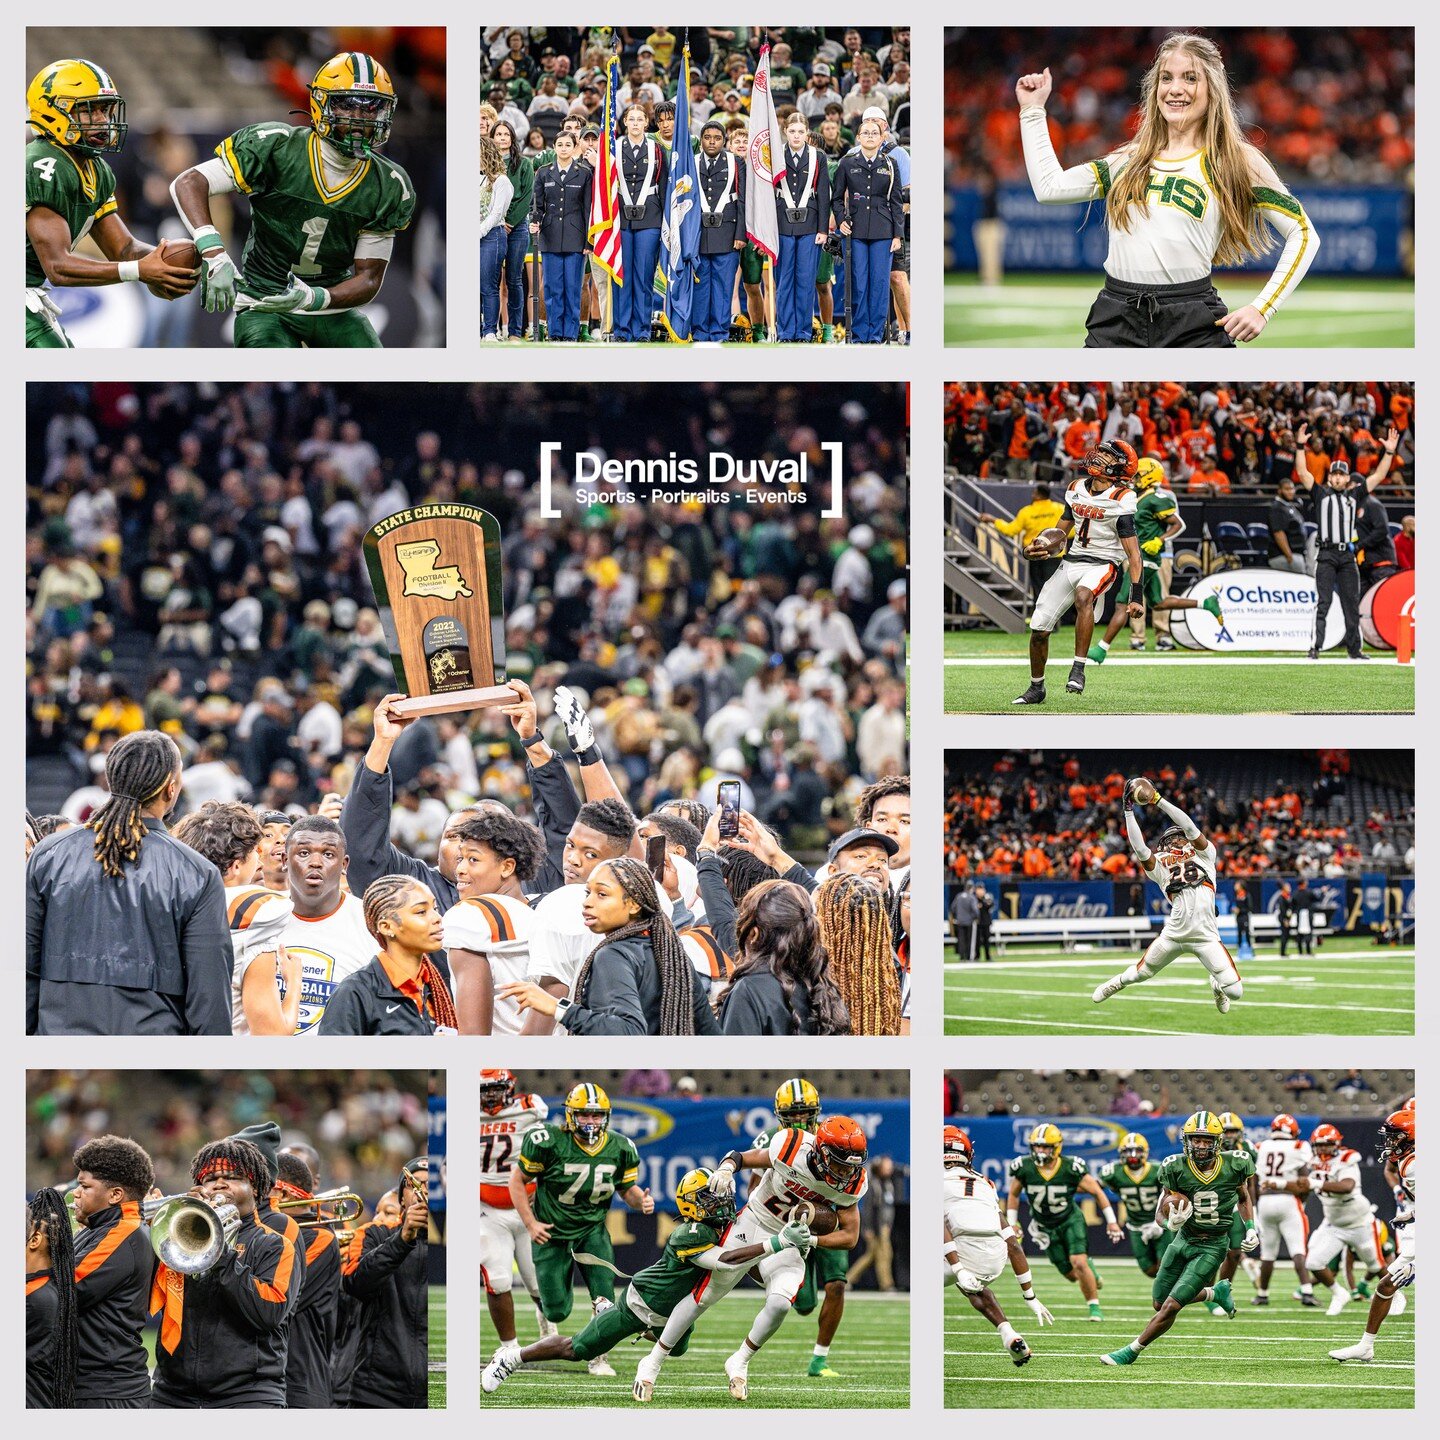 LHSAA State Football Championships - Cecilia vs Opelousas 

#statechampionship #lhsaa #opelousas #cecilia #footballplayoffs #footballchampionship #geauxpreps #sportsphotographer #superdome #nola 

Football photo galleries go live today 12/12 at 5PM a